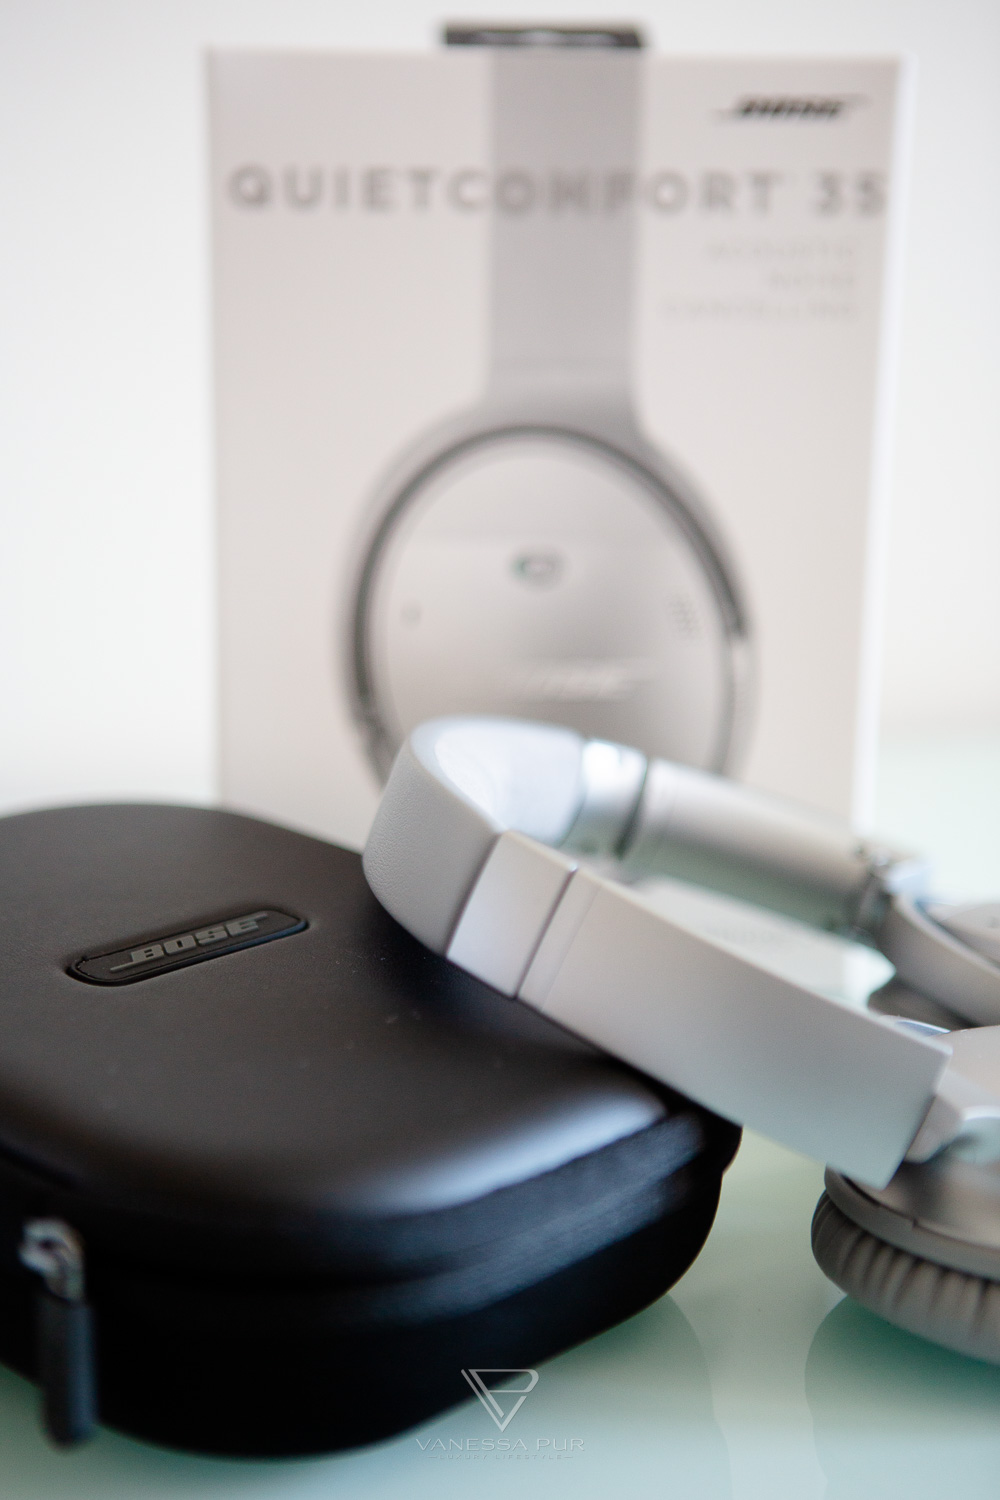 BOSE QUIET COMFORT QC35 - Noise cancelling - Review - Tech blog - Tech blogger - Headset - Music, video, television - Bluetooth headphones in review